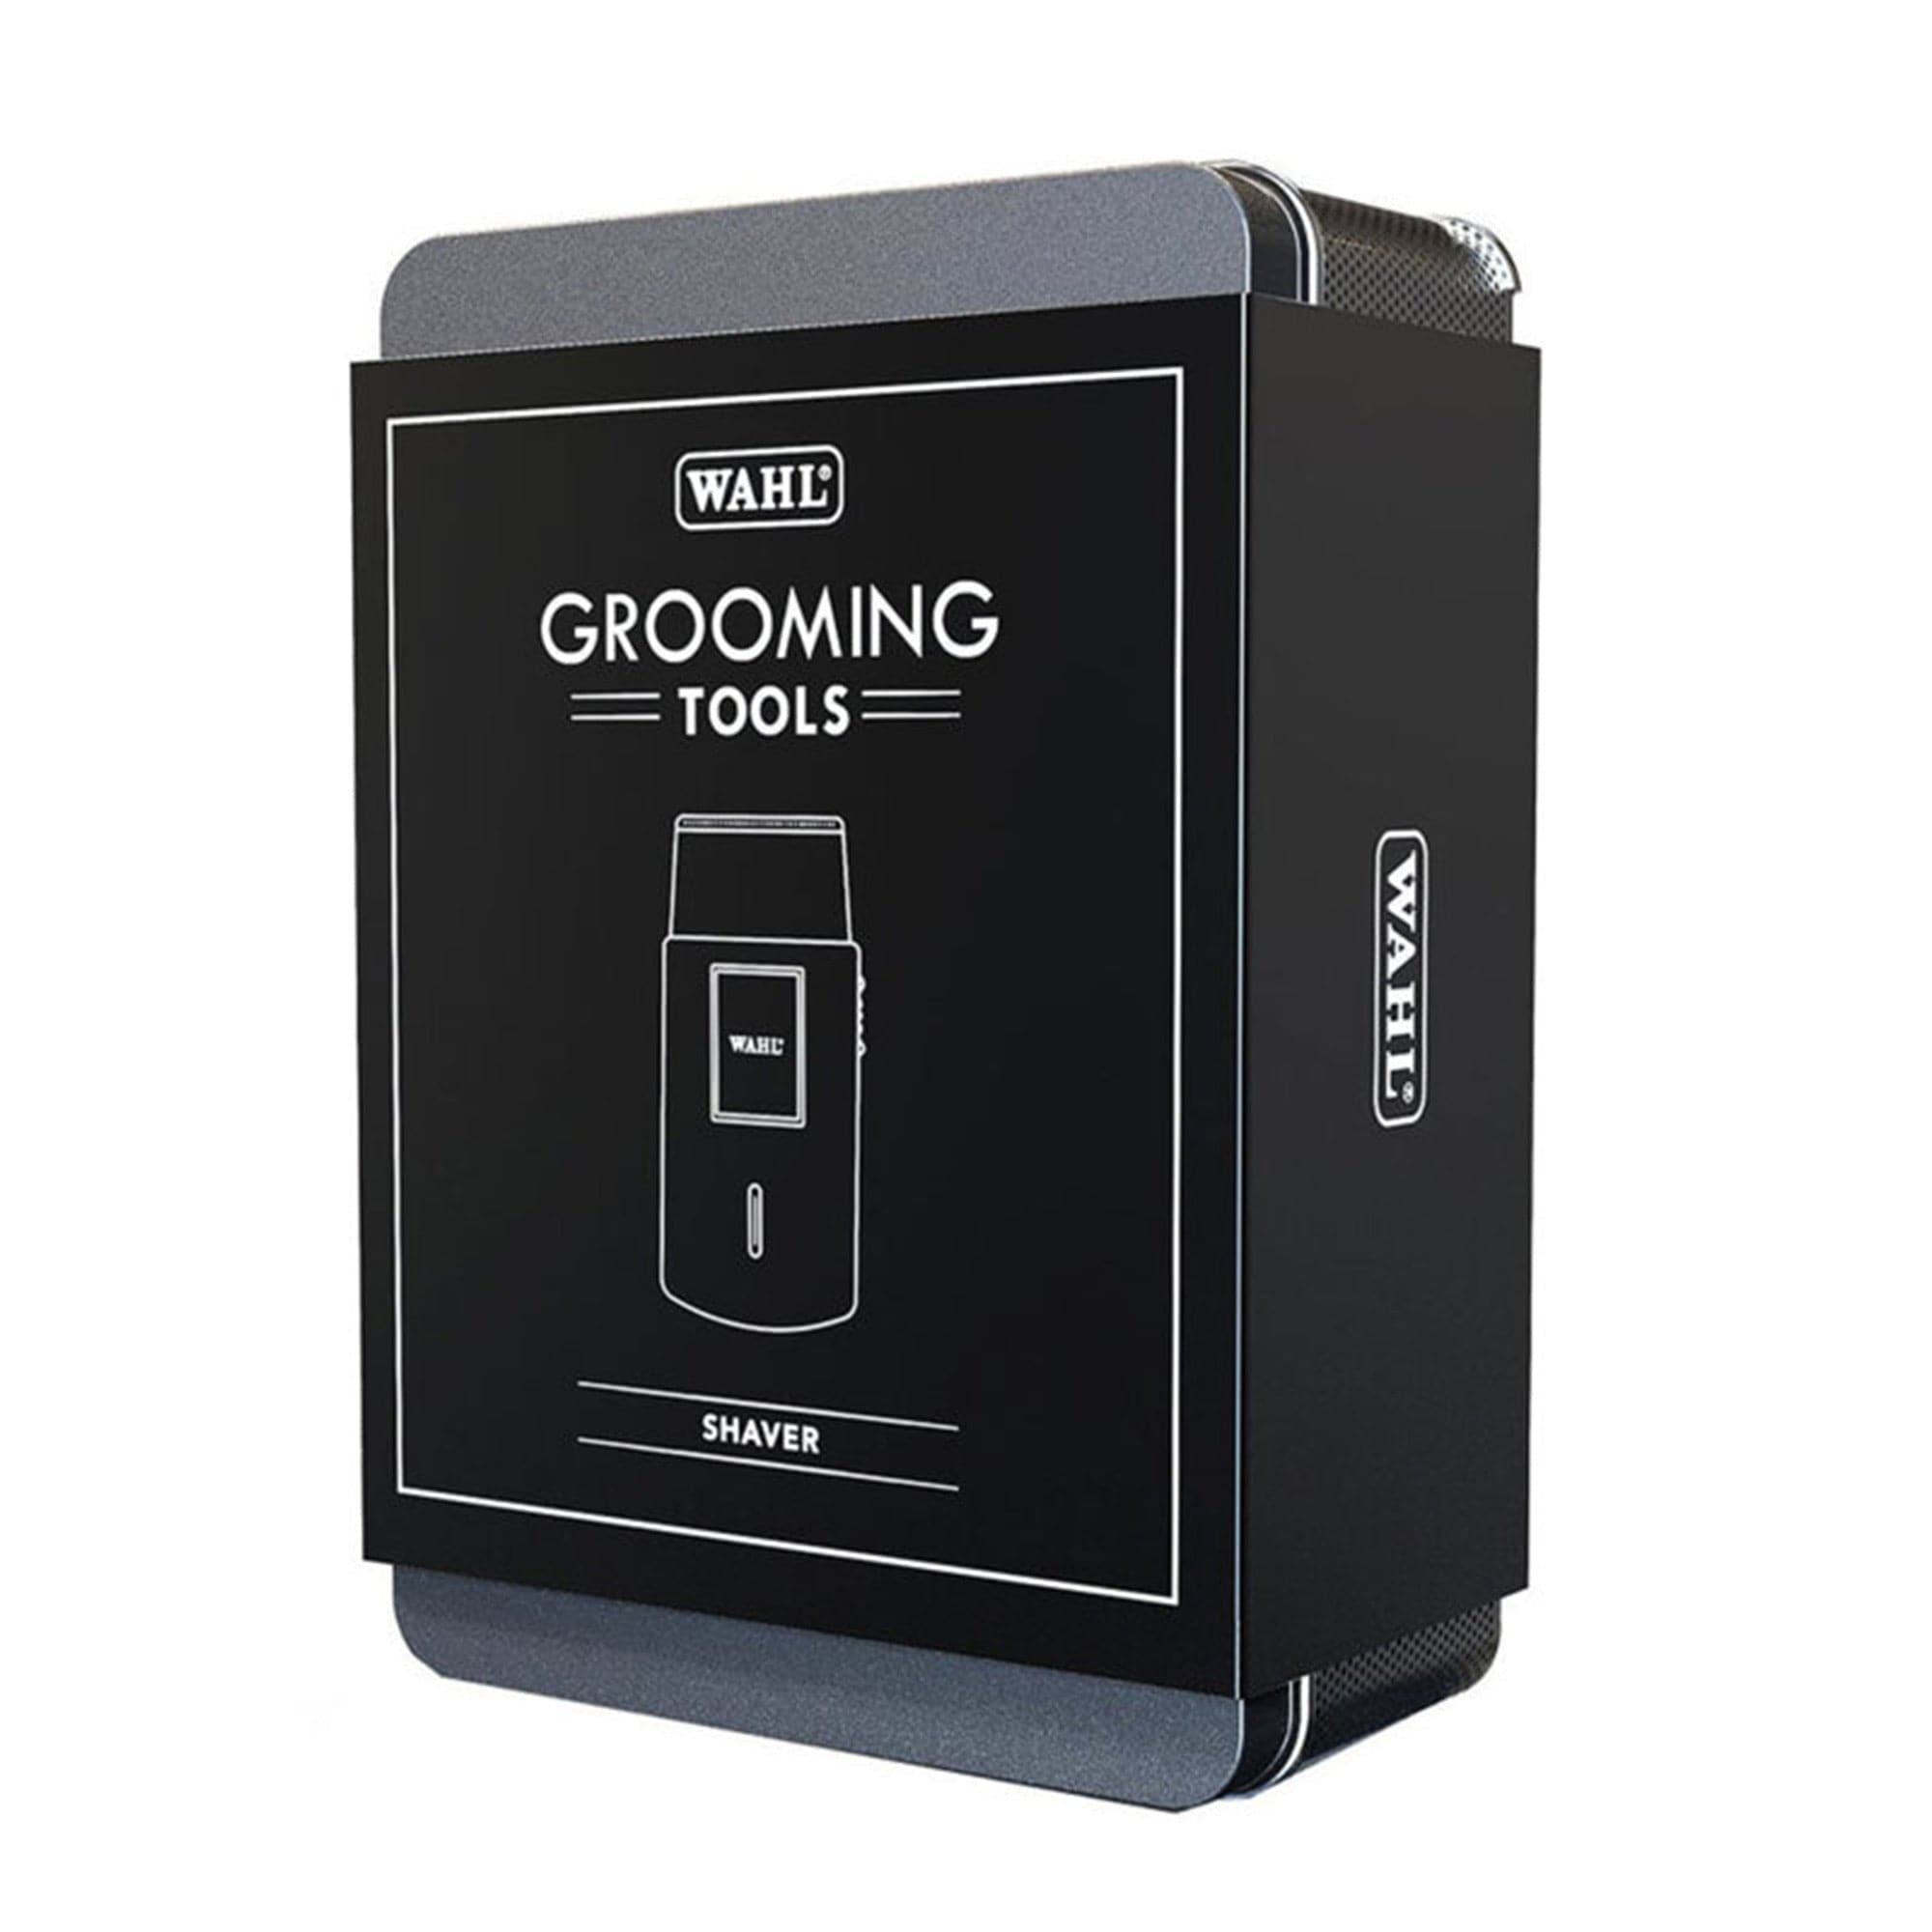 Wahl - Grooming Tools Shaver